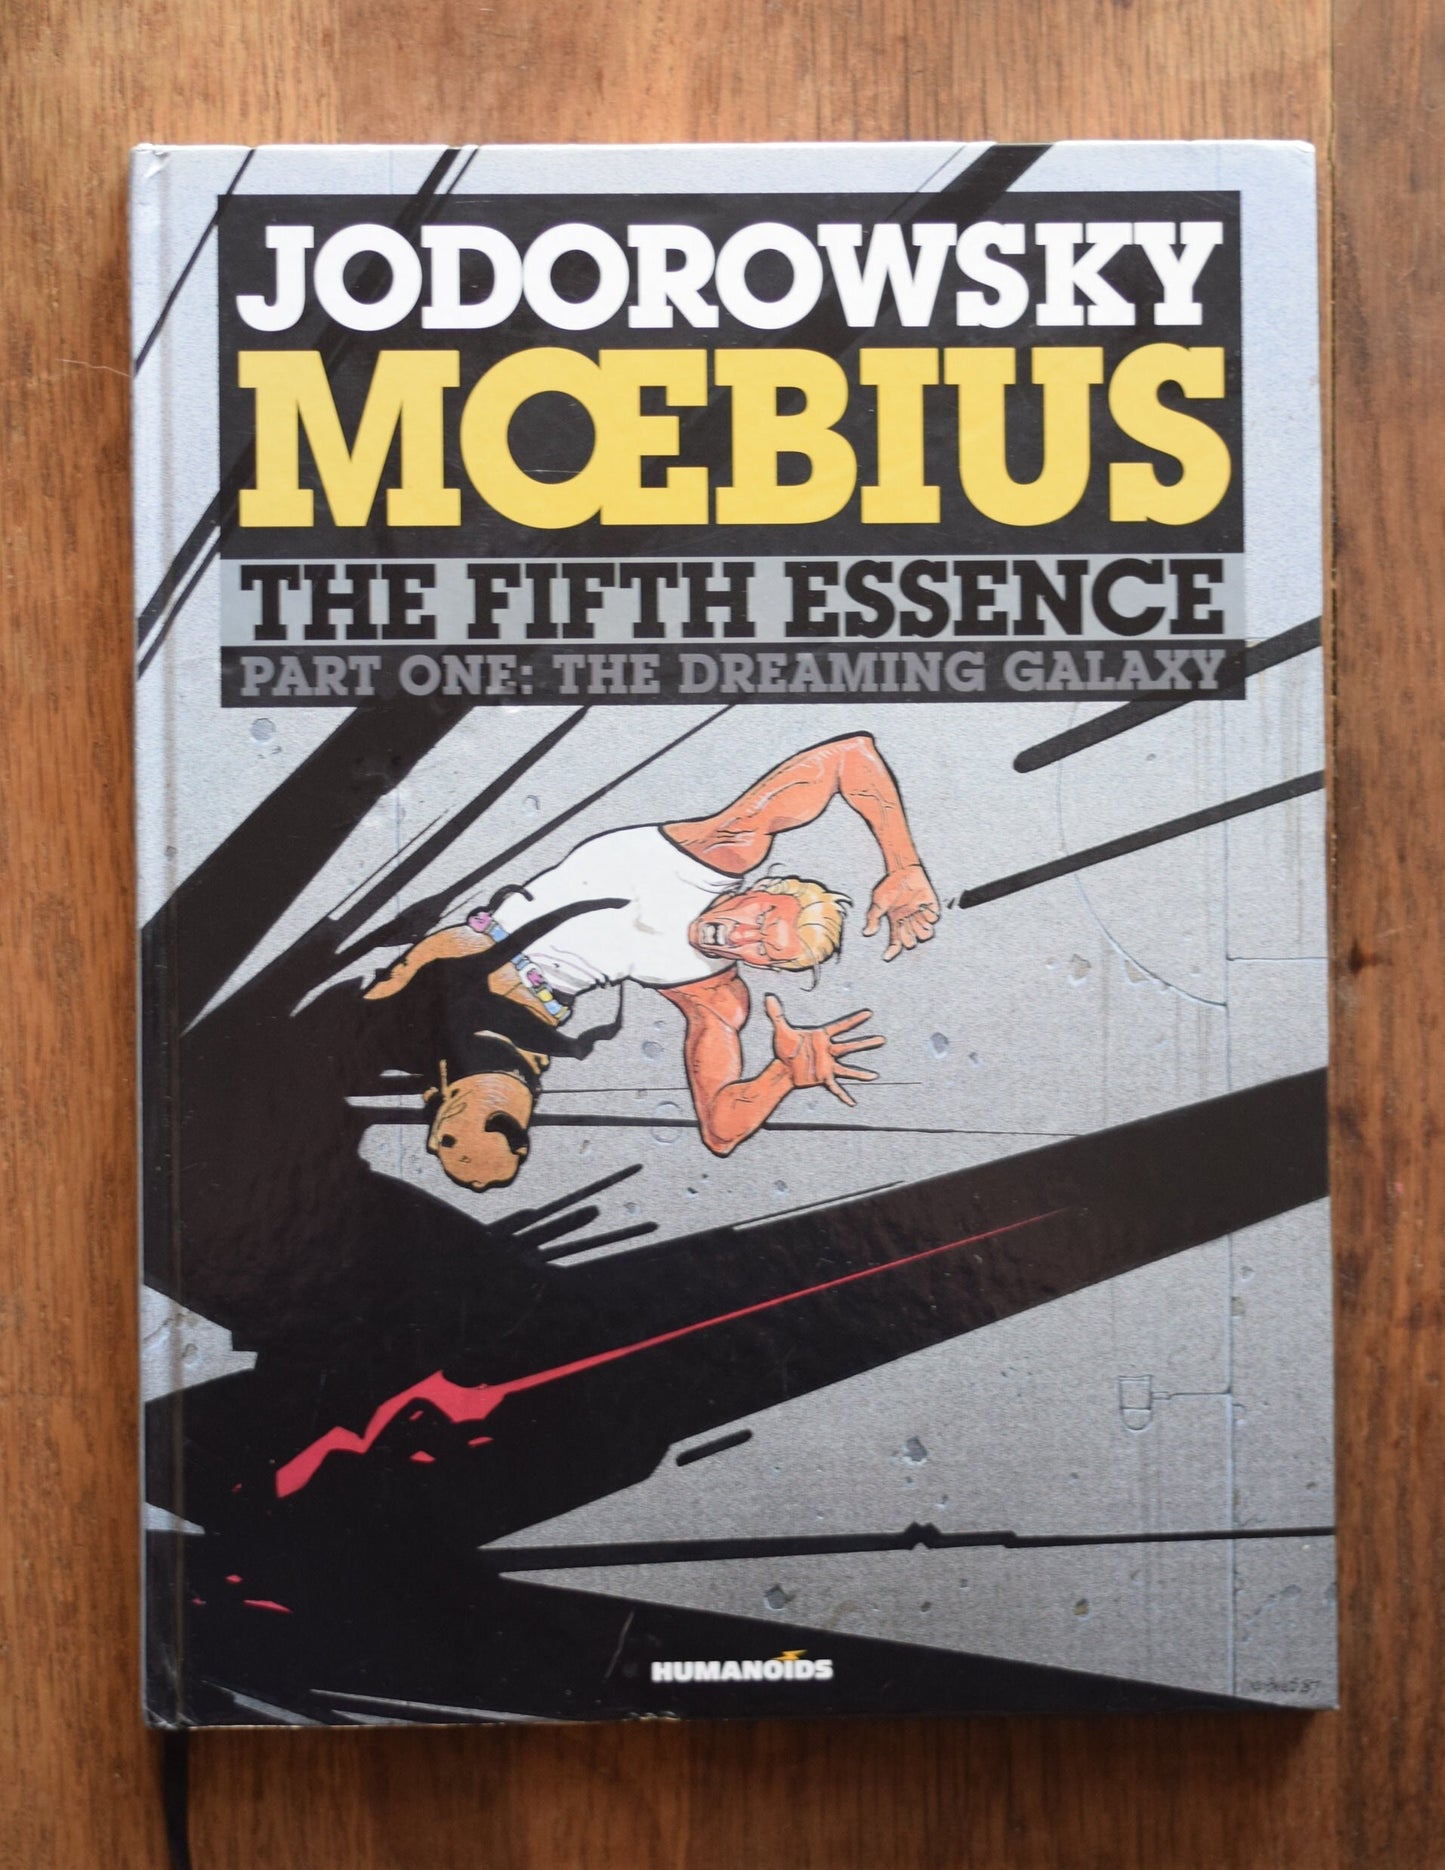 Vintage Graphic Novel: Alexandro Jodorowshy and Jean Moebius Giraud - The Fifth Essence, Part 1 The Dreaming LIMITED EDITION